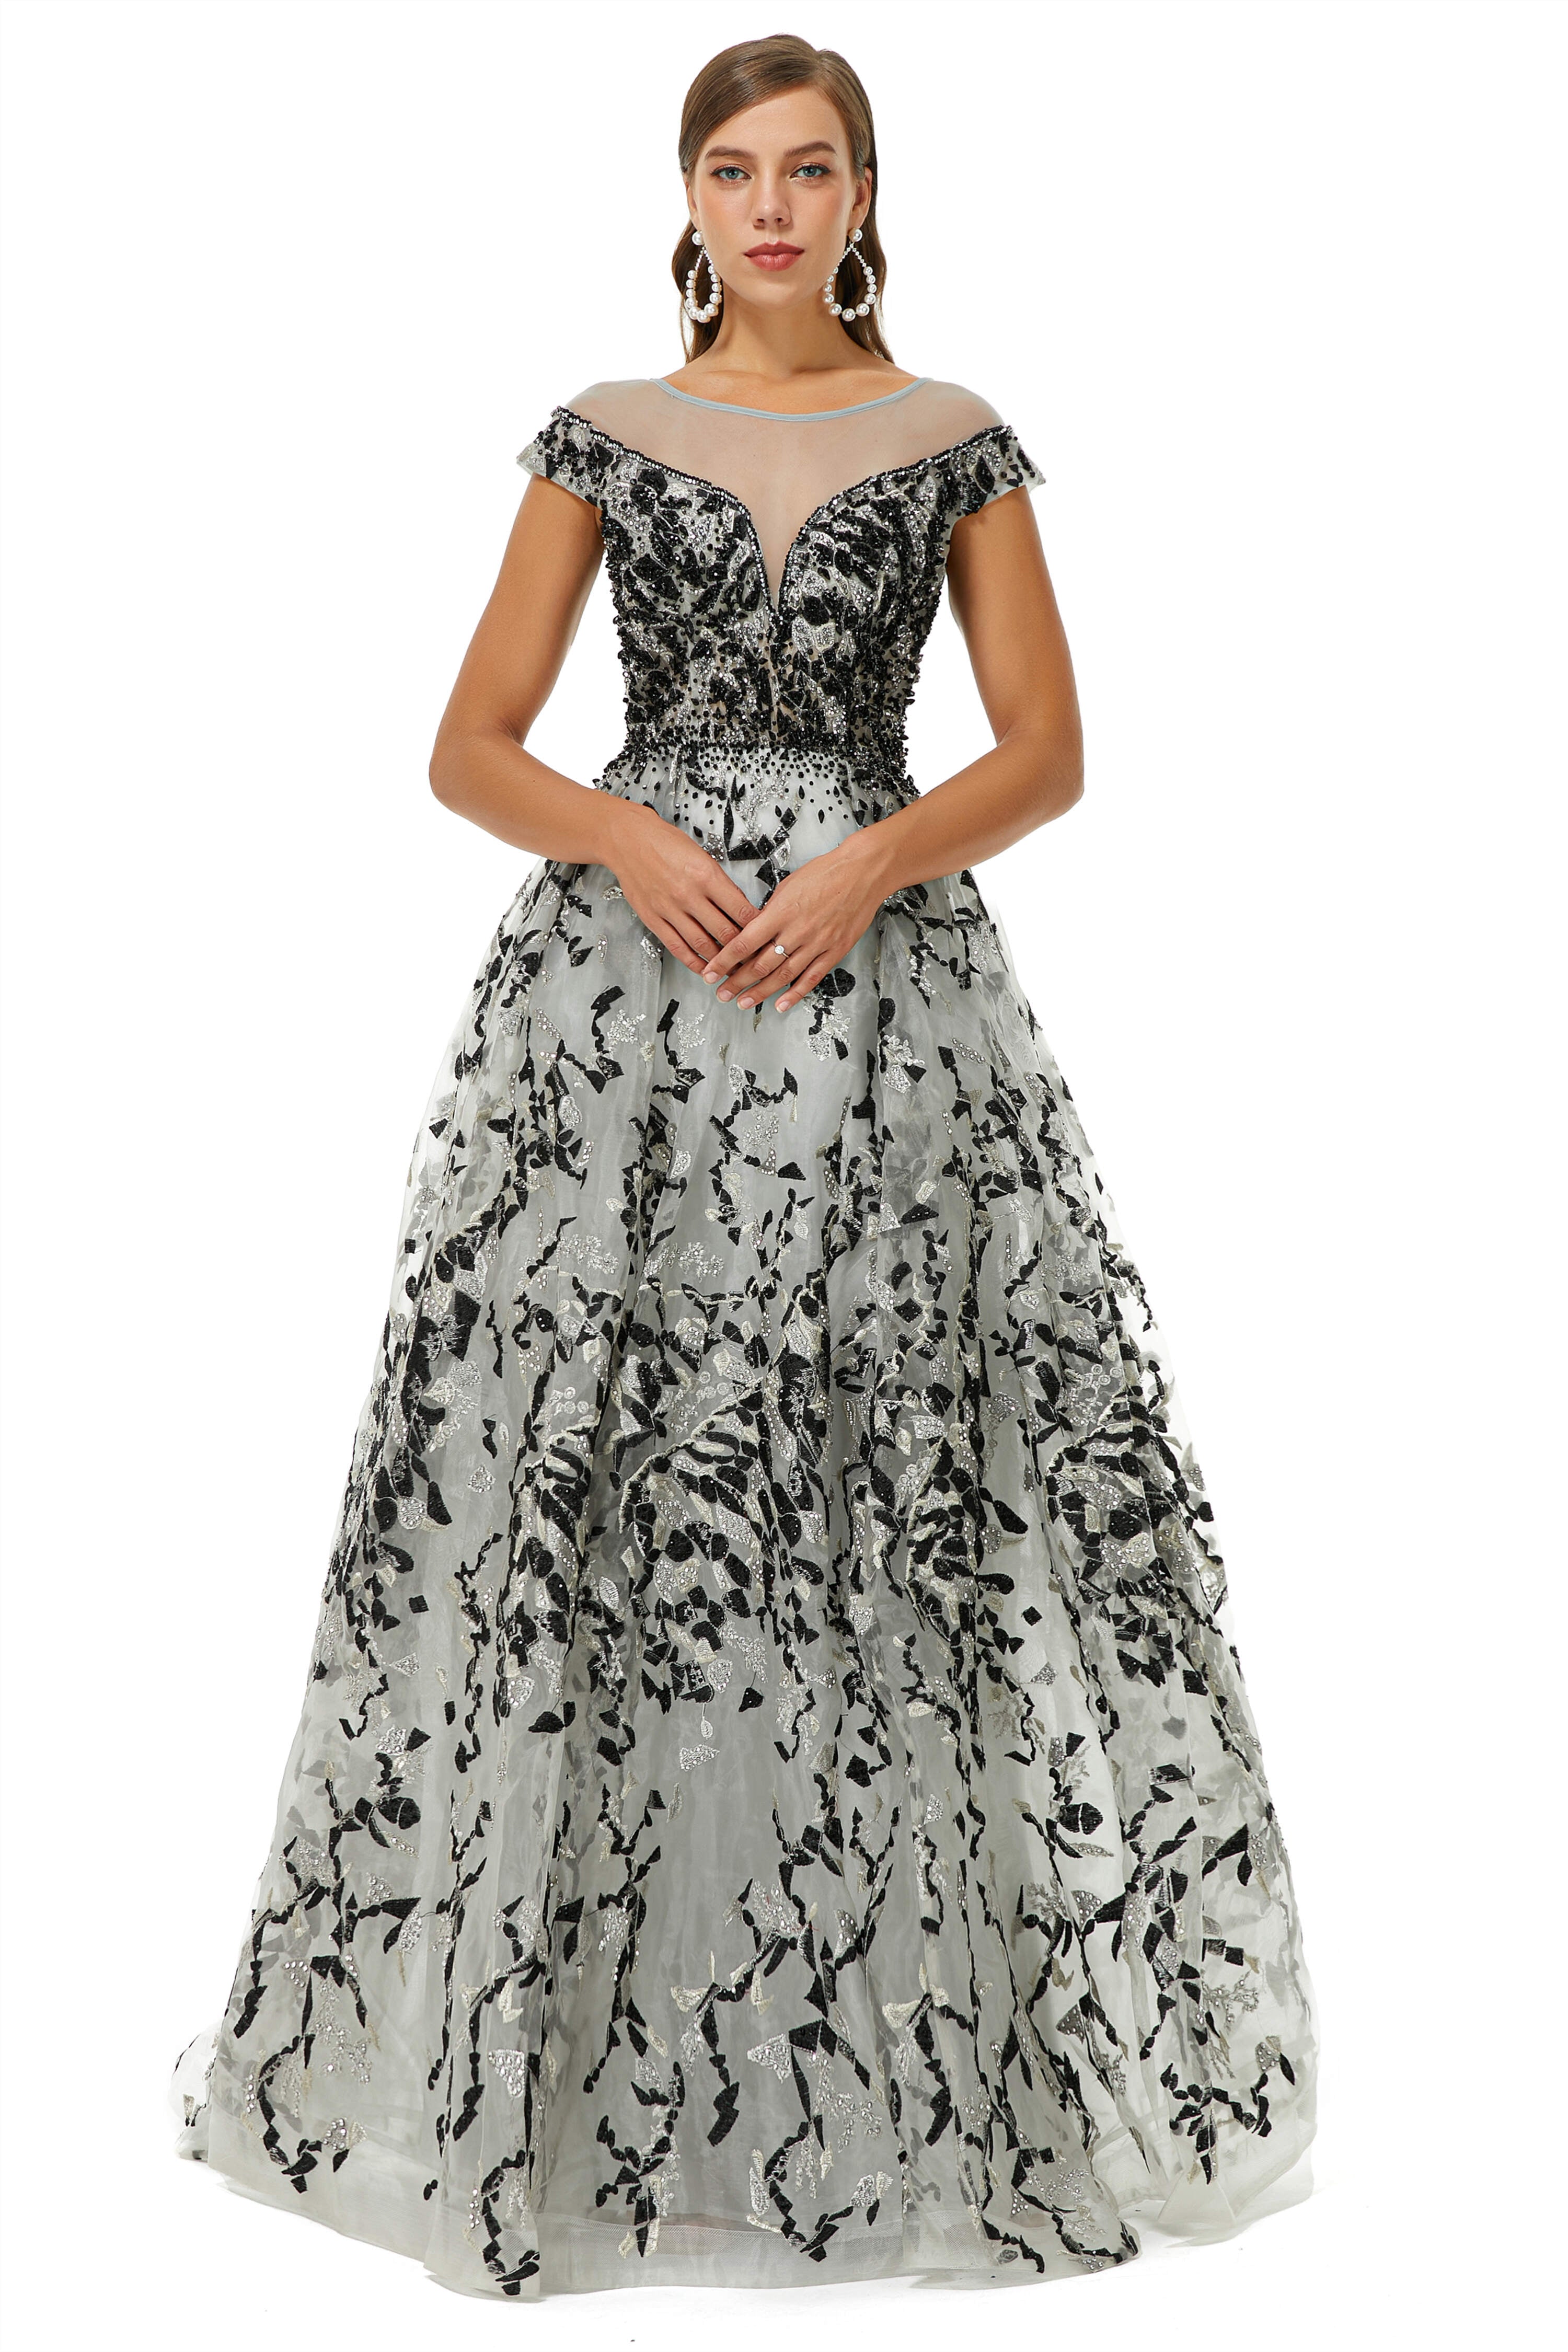 A-line Jewel Beaded Floor-length cap sleeve Sequined Corset Prom Dresses outfit, Formal Dresses Black